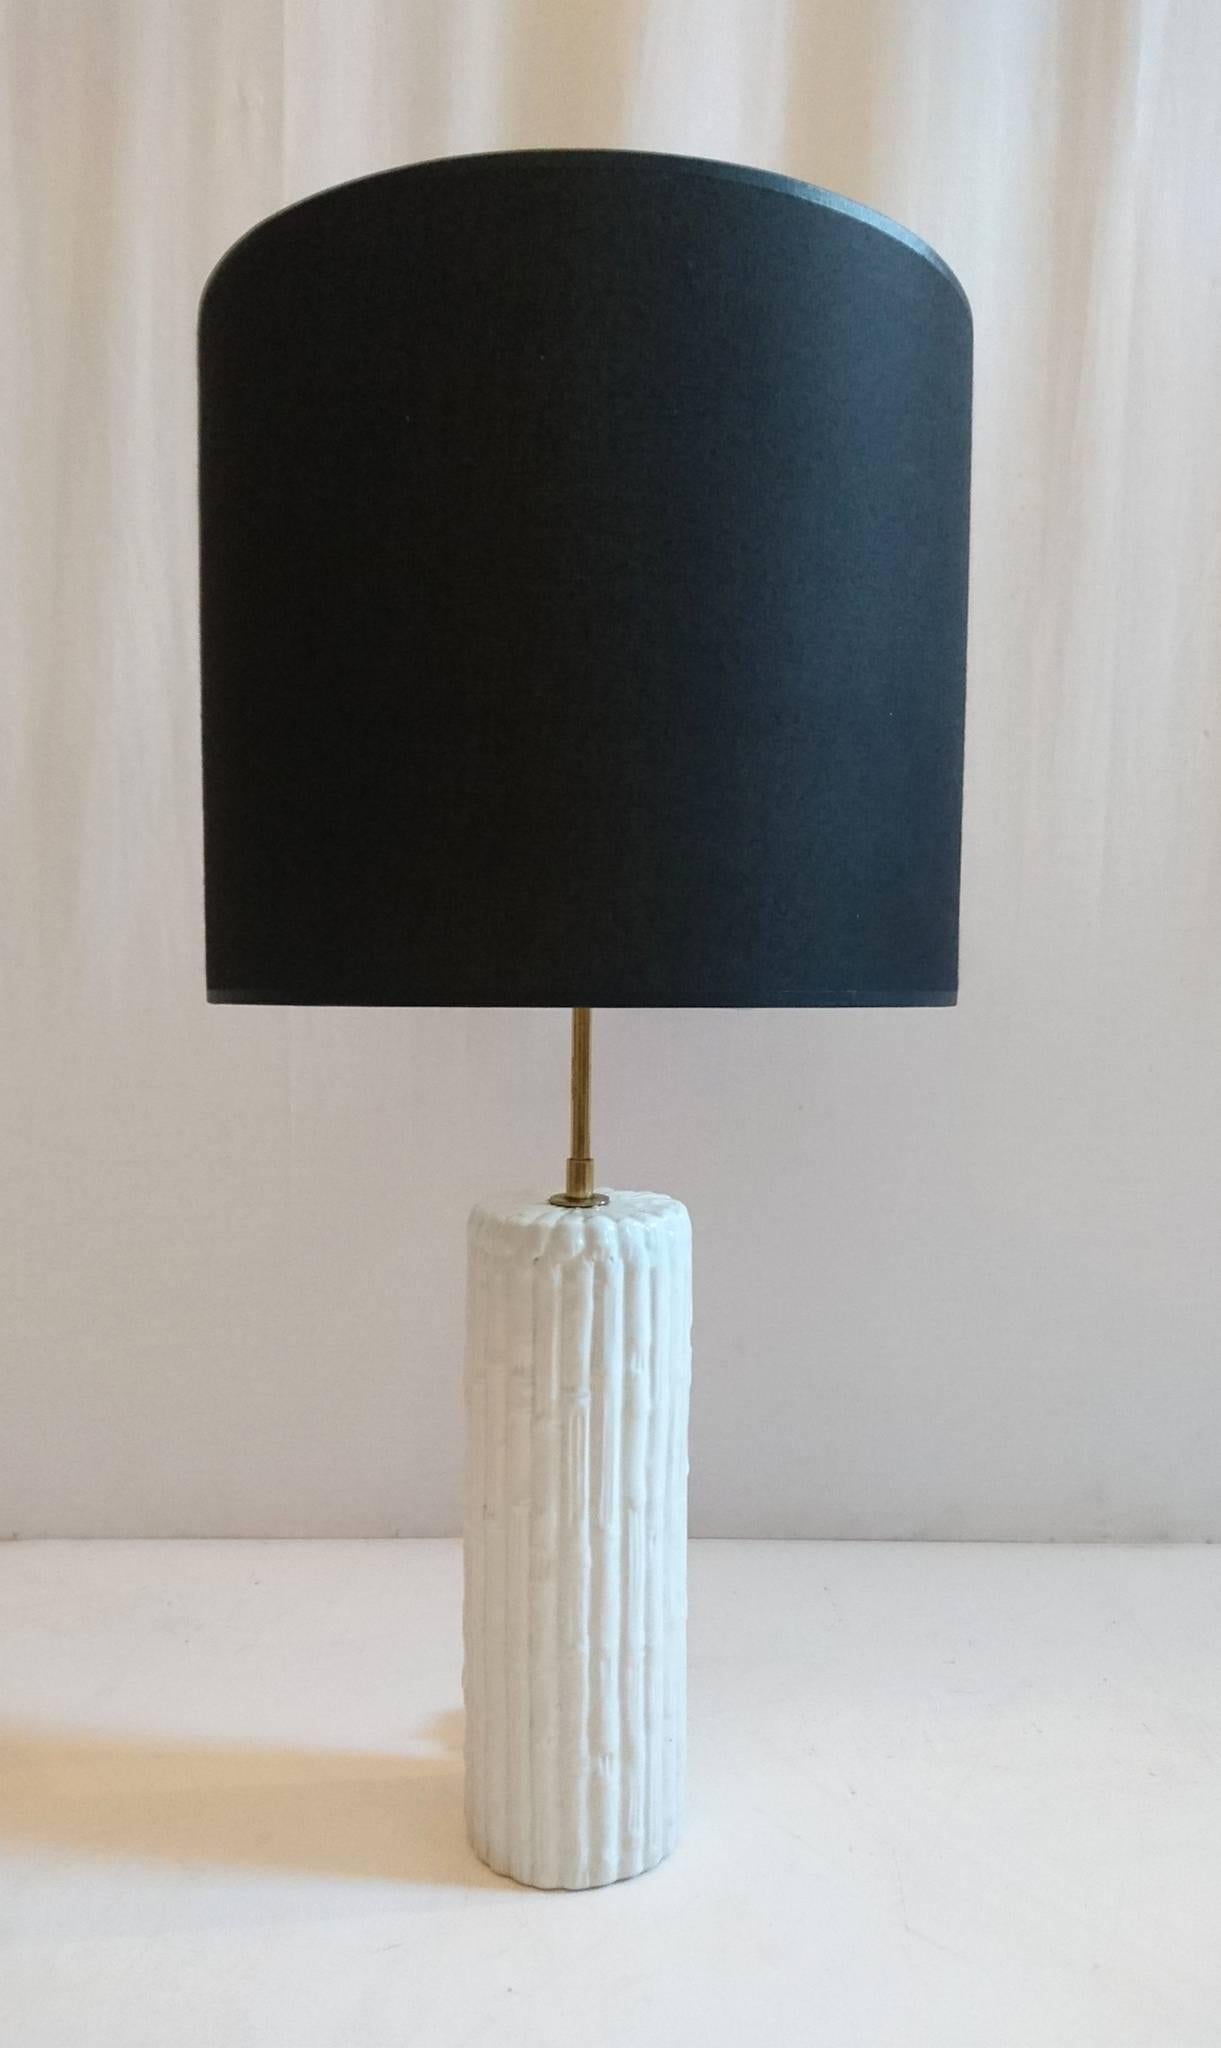 Graceful table lamp in white porcelain made to look like bamboo with a brass stem to hold the brand new black lampshade.